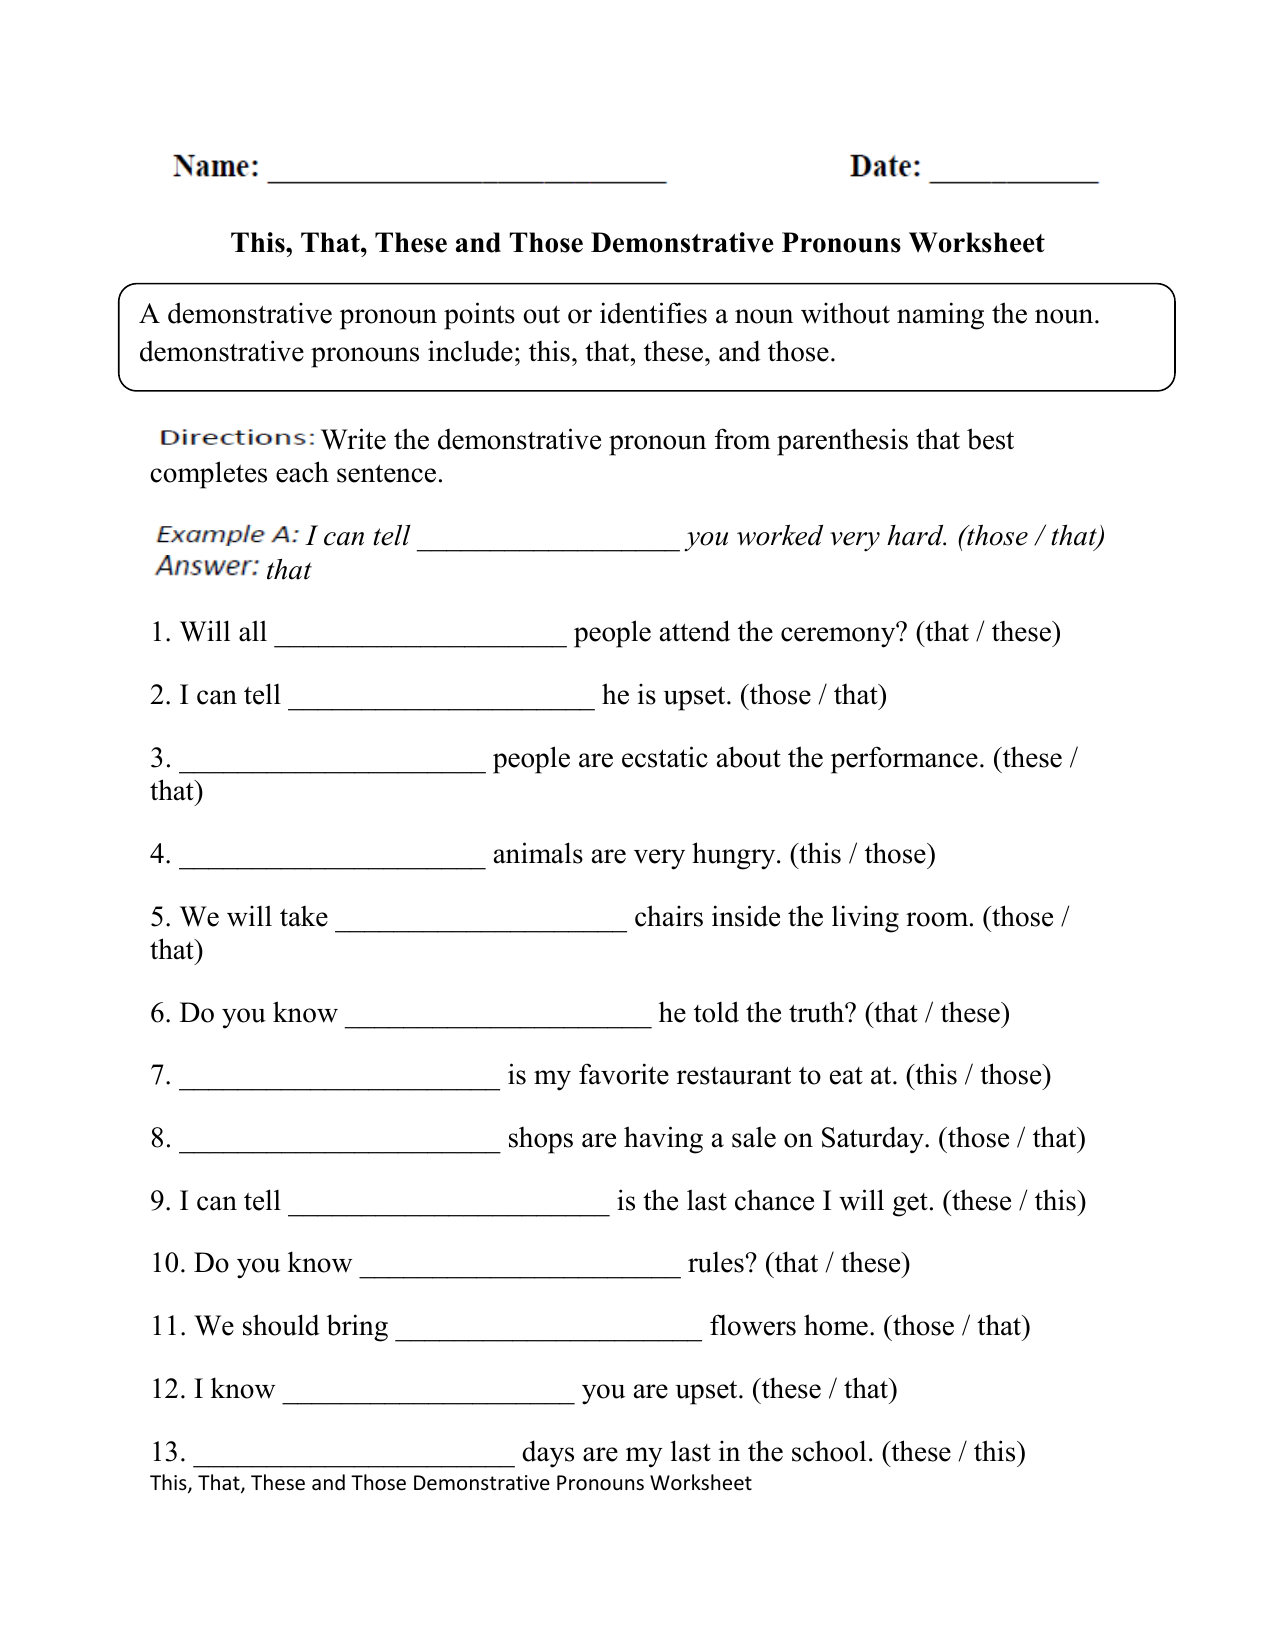 Worksheet On Demonstrative Adjectives For Class 5